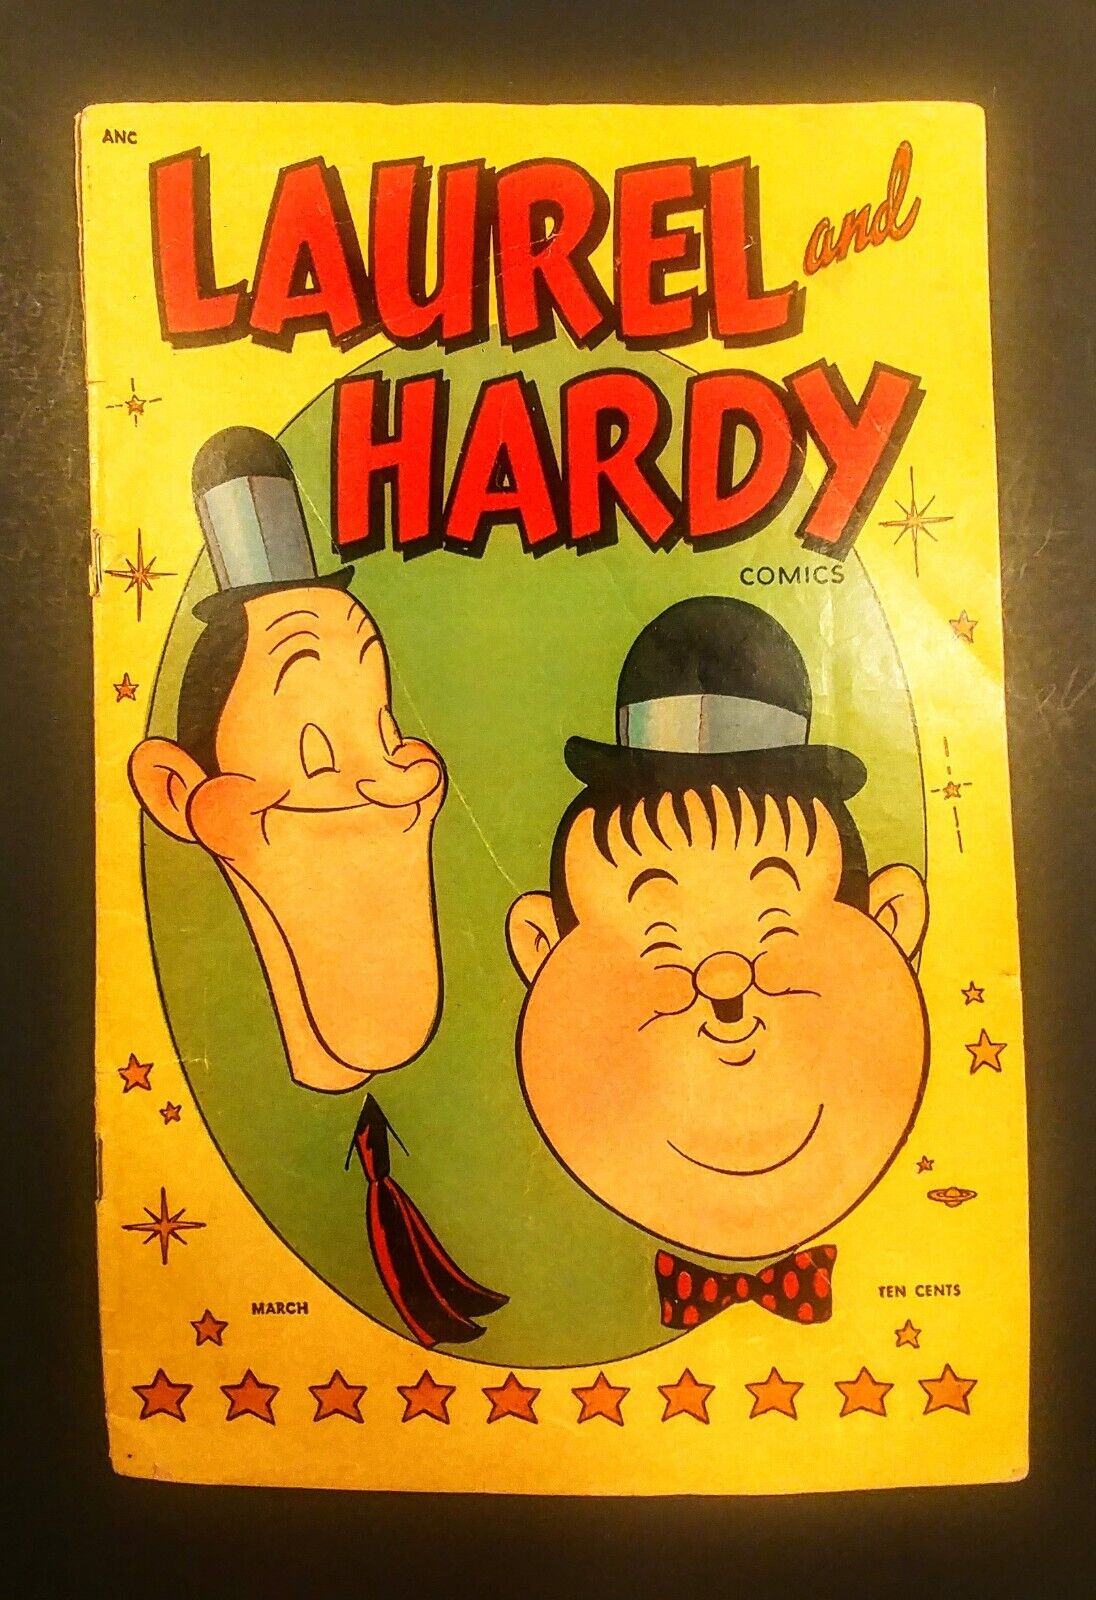 LAUREL AND HARDY NO. 1 1949. VERY GOOD/FINE- CONDITION.